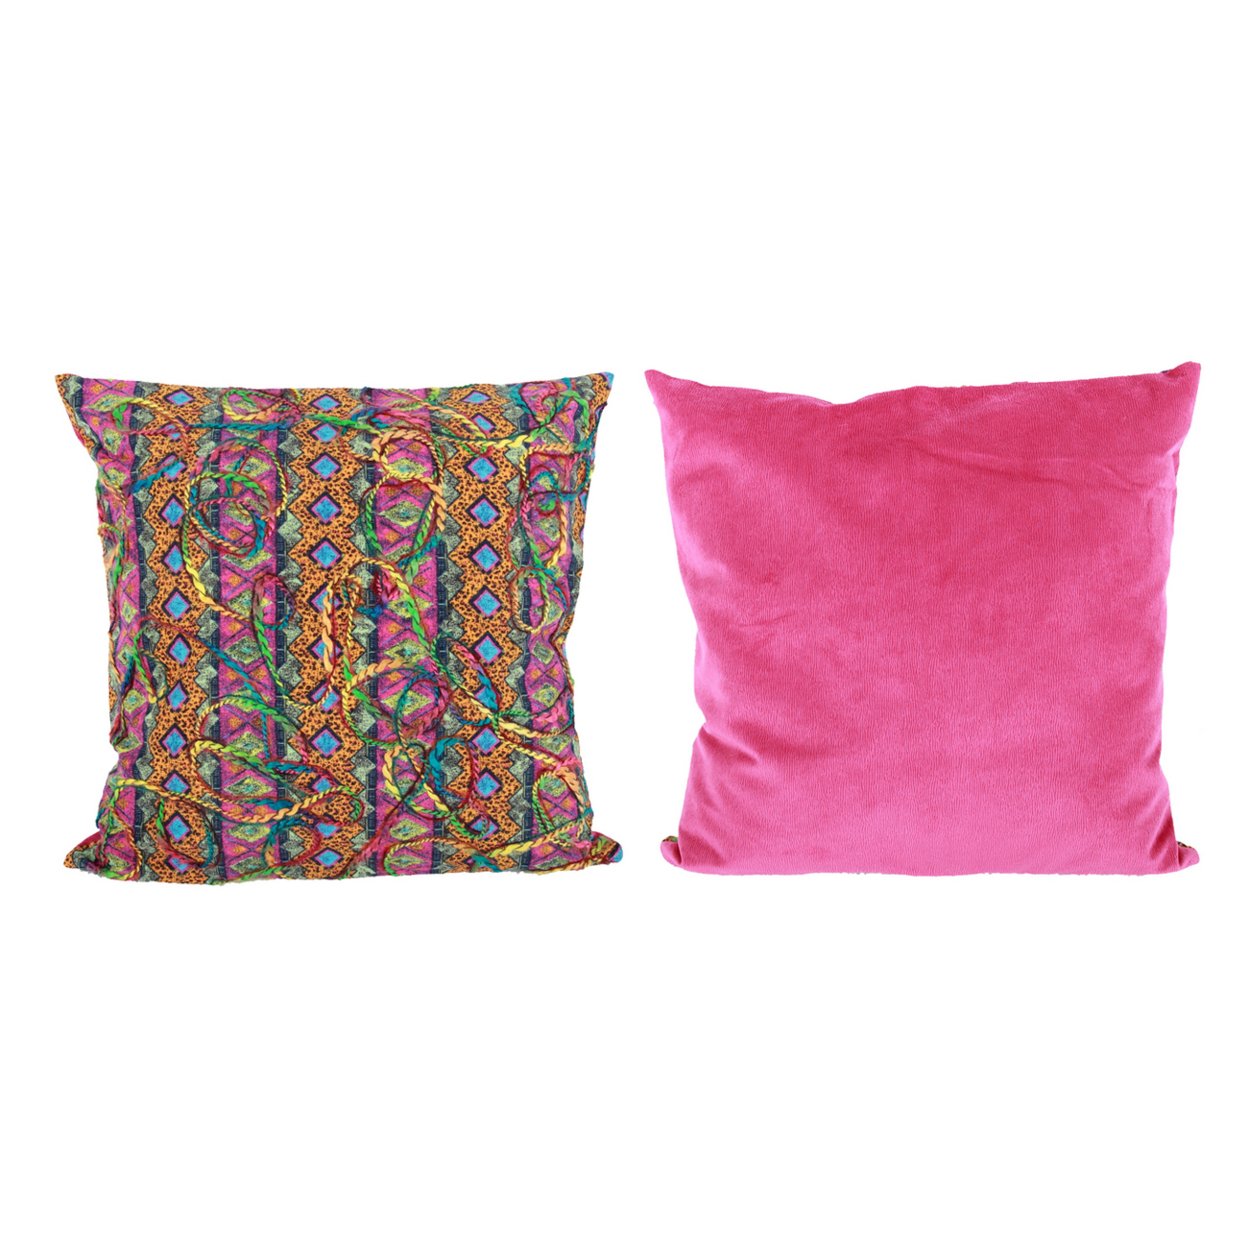 20 X 20 Inch Polyester Pillow With Intricate Embroidery, Set Of 2, Multicolor- Saltoro Sherpi